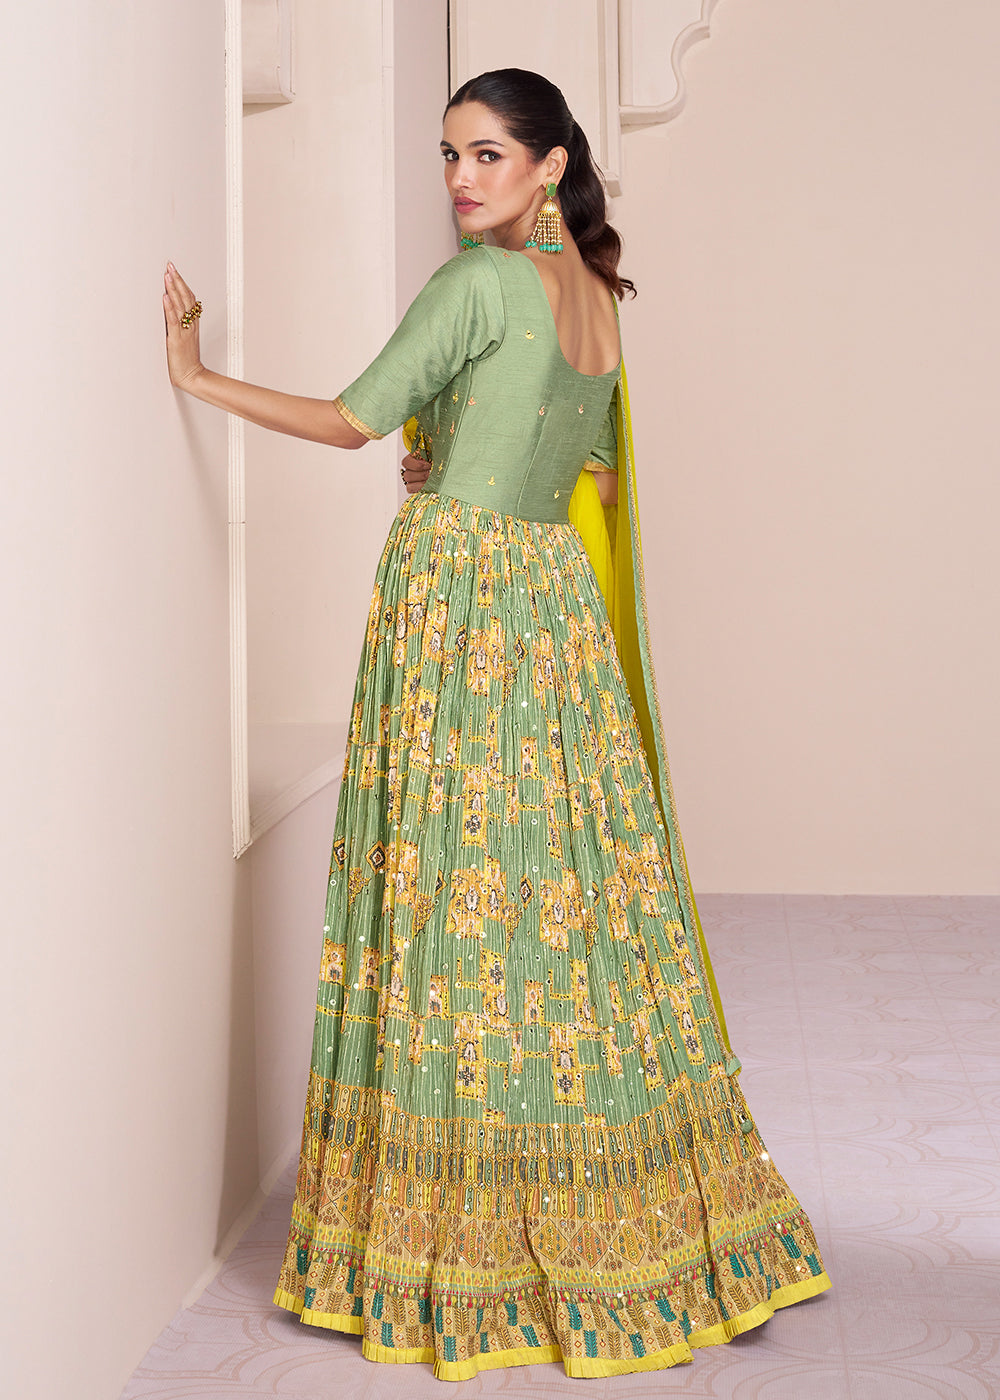 Buy Now Green & Yellow Chinnon Silk Printed & Embroidered Anarkali Dress Online in USA, UK, Australia, New Zealand, Canada & Worldwide at Empress Clothing.